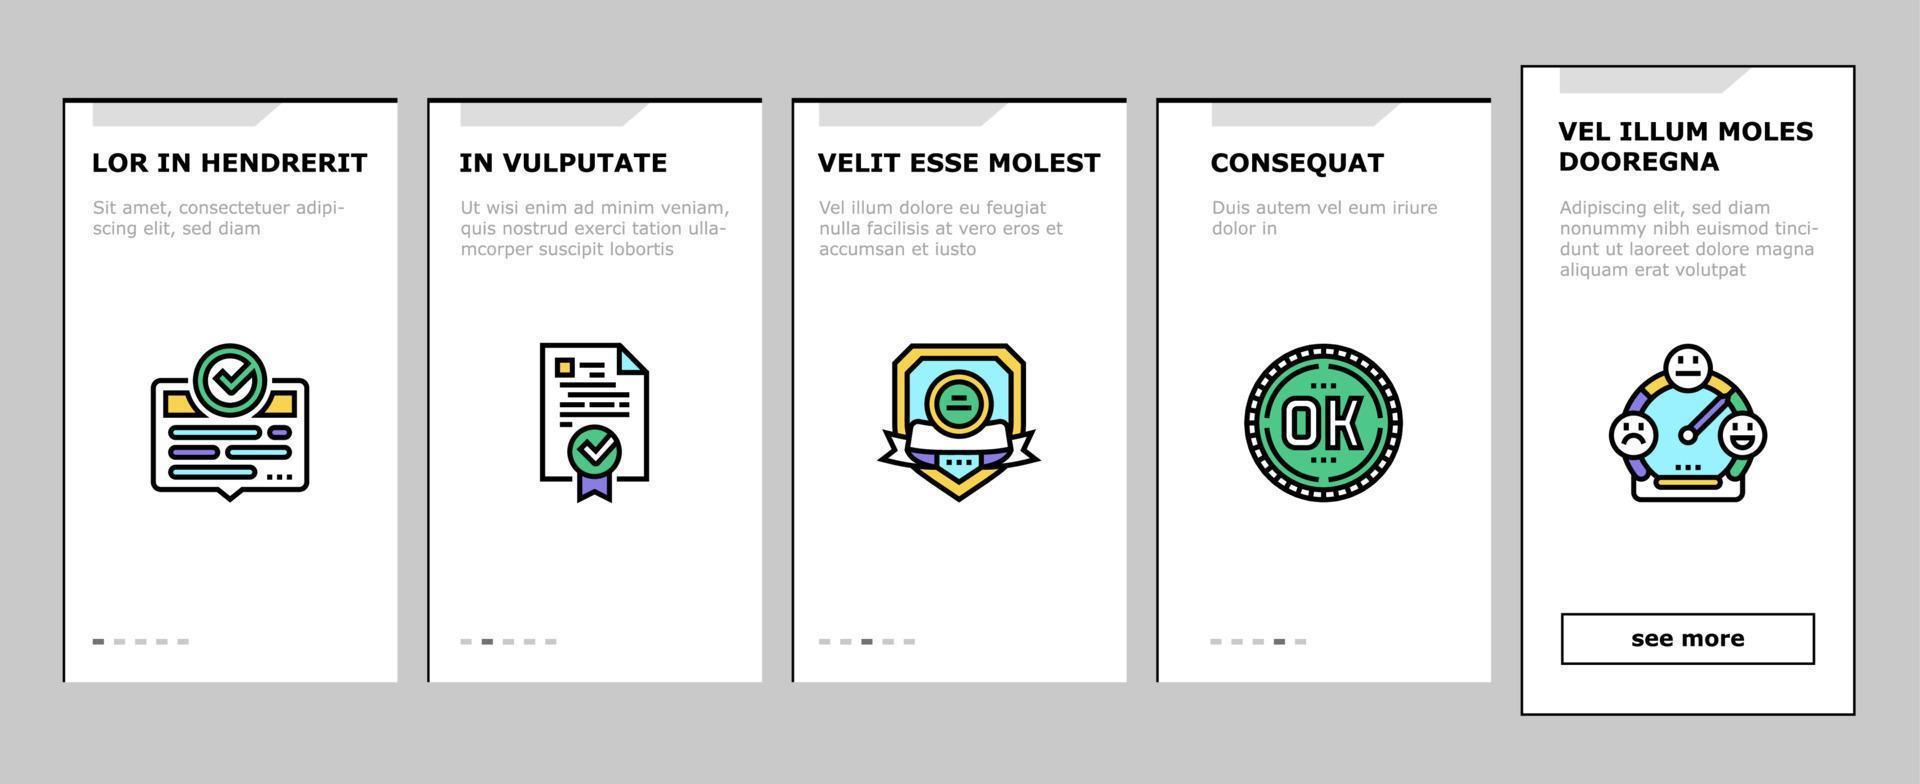 Quality Approve Mark And Medal onboarding icons set vector